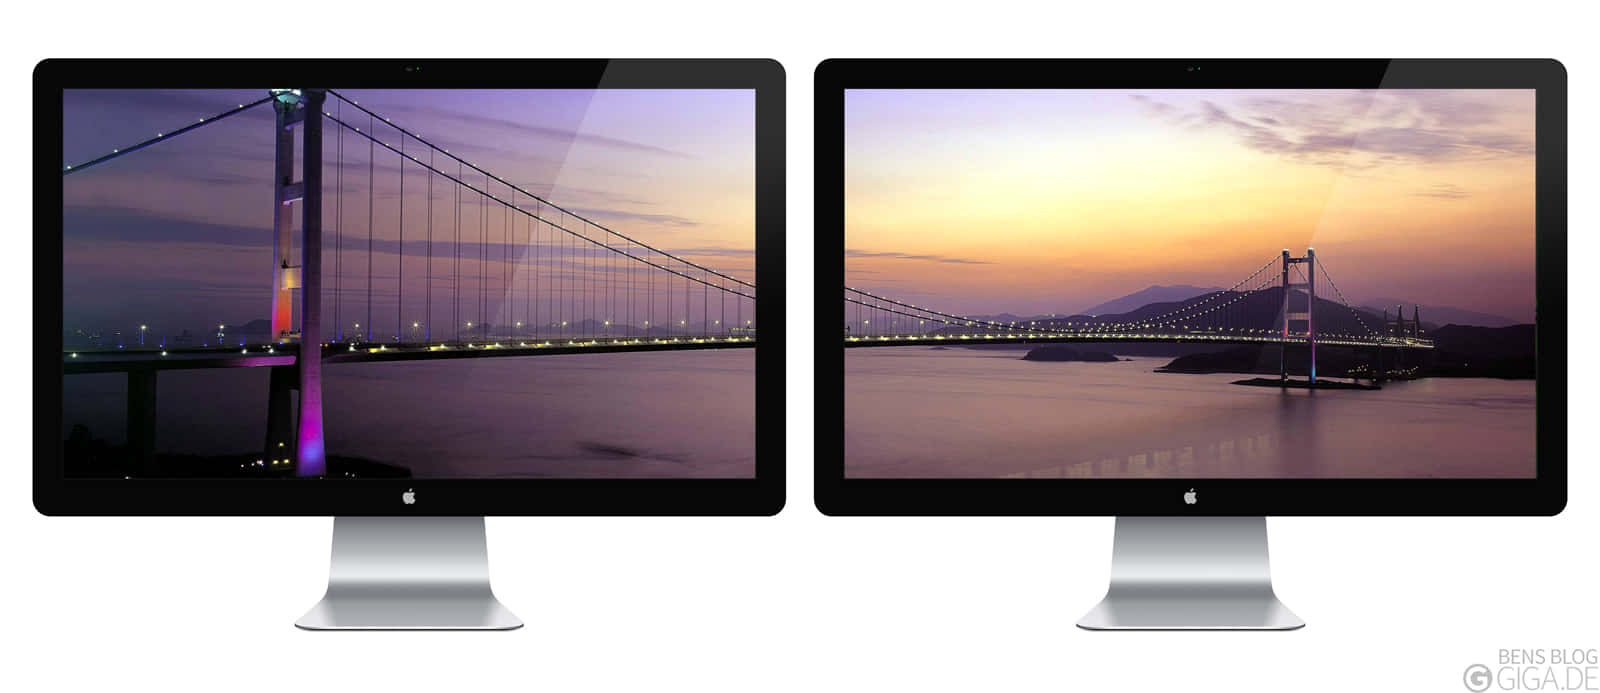 Two Monitors With A Bridge